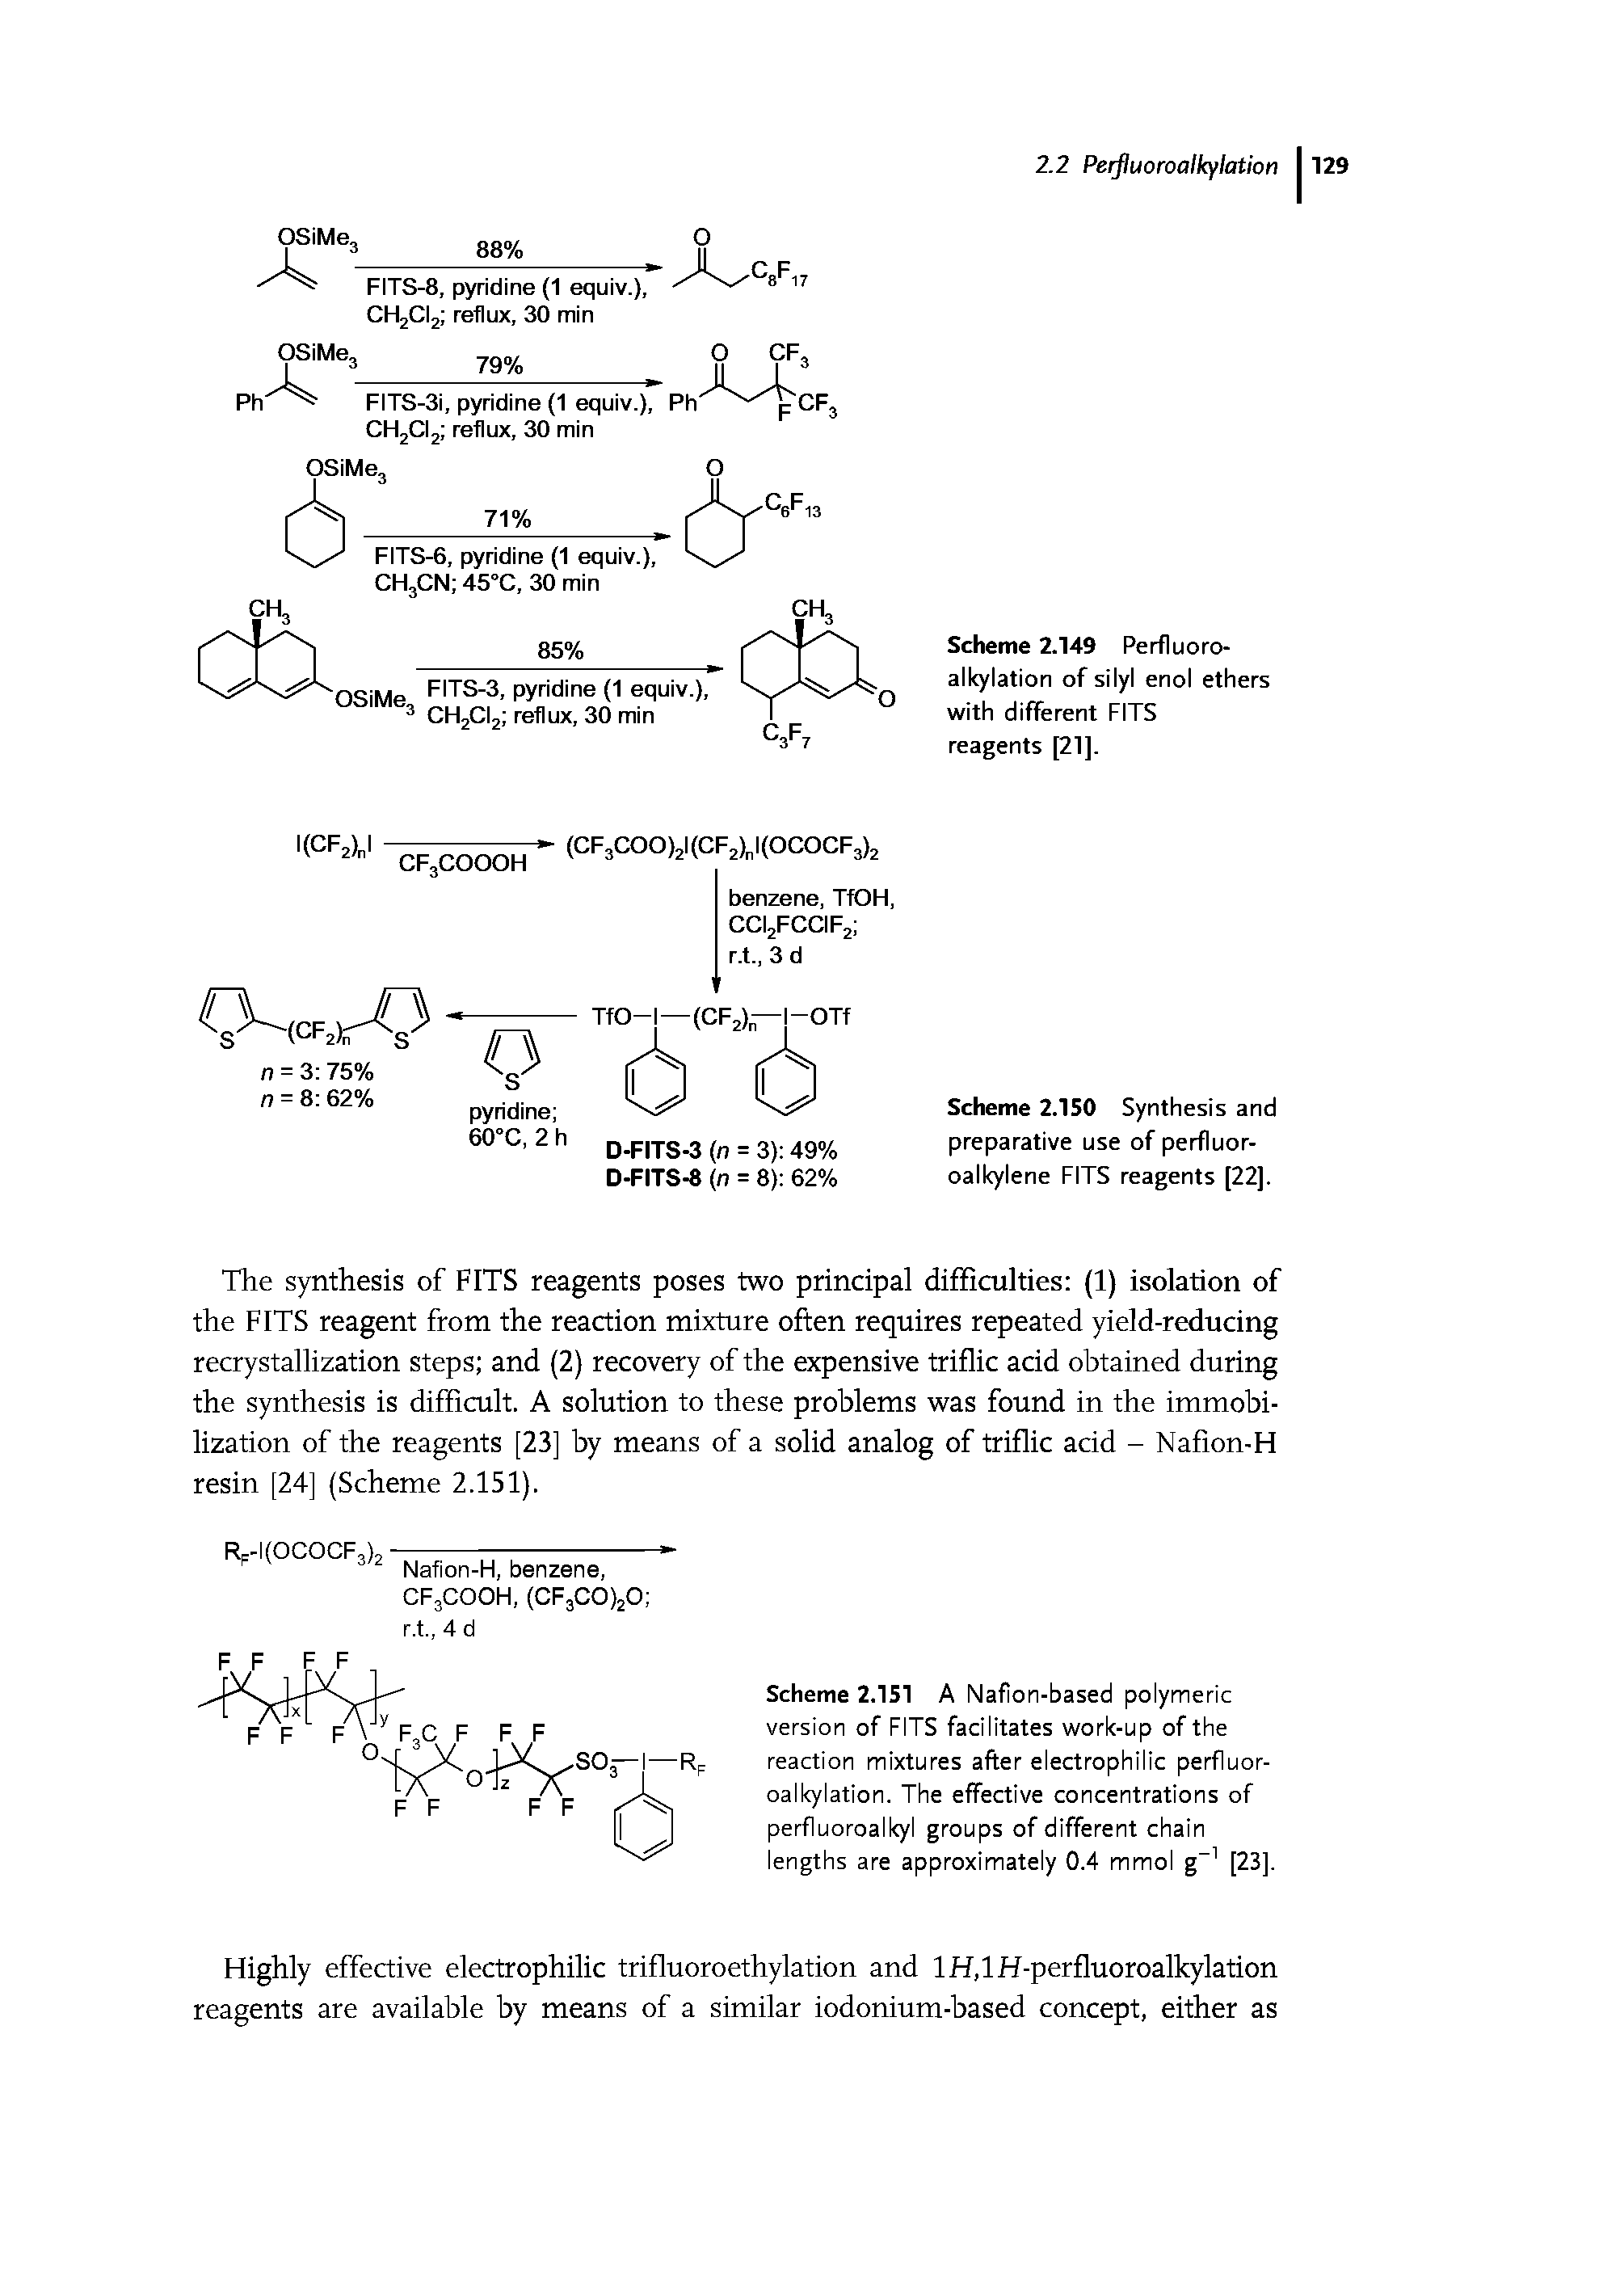 Scheme 2.149 Perfluoroalkylation of silyl enol ethers with different FITS reagents [21].